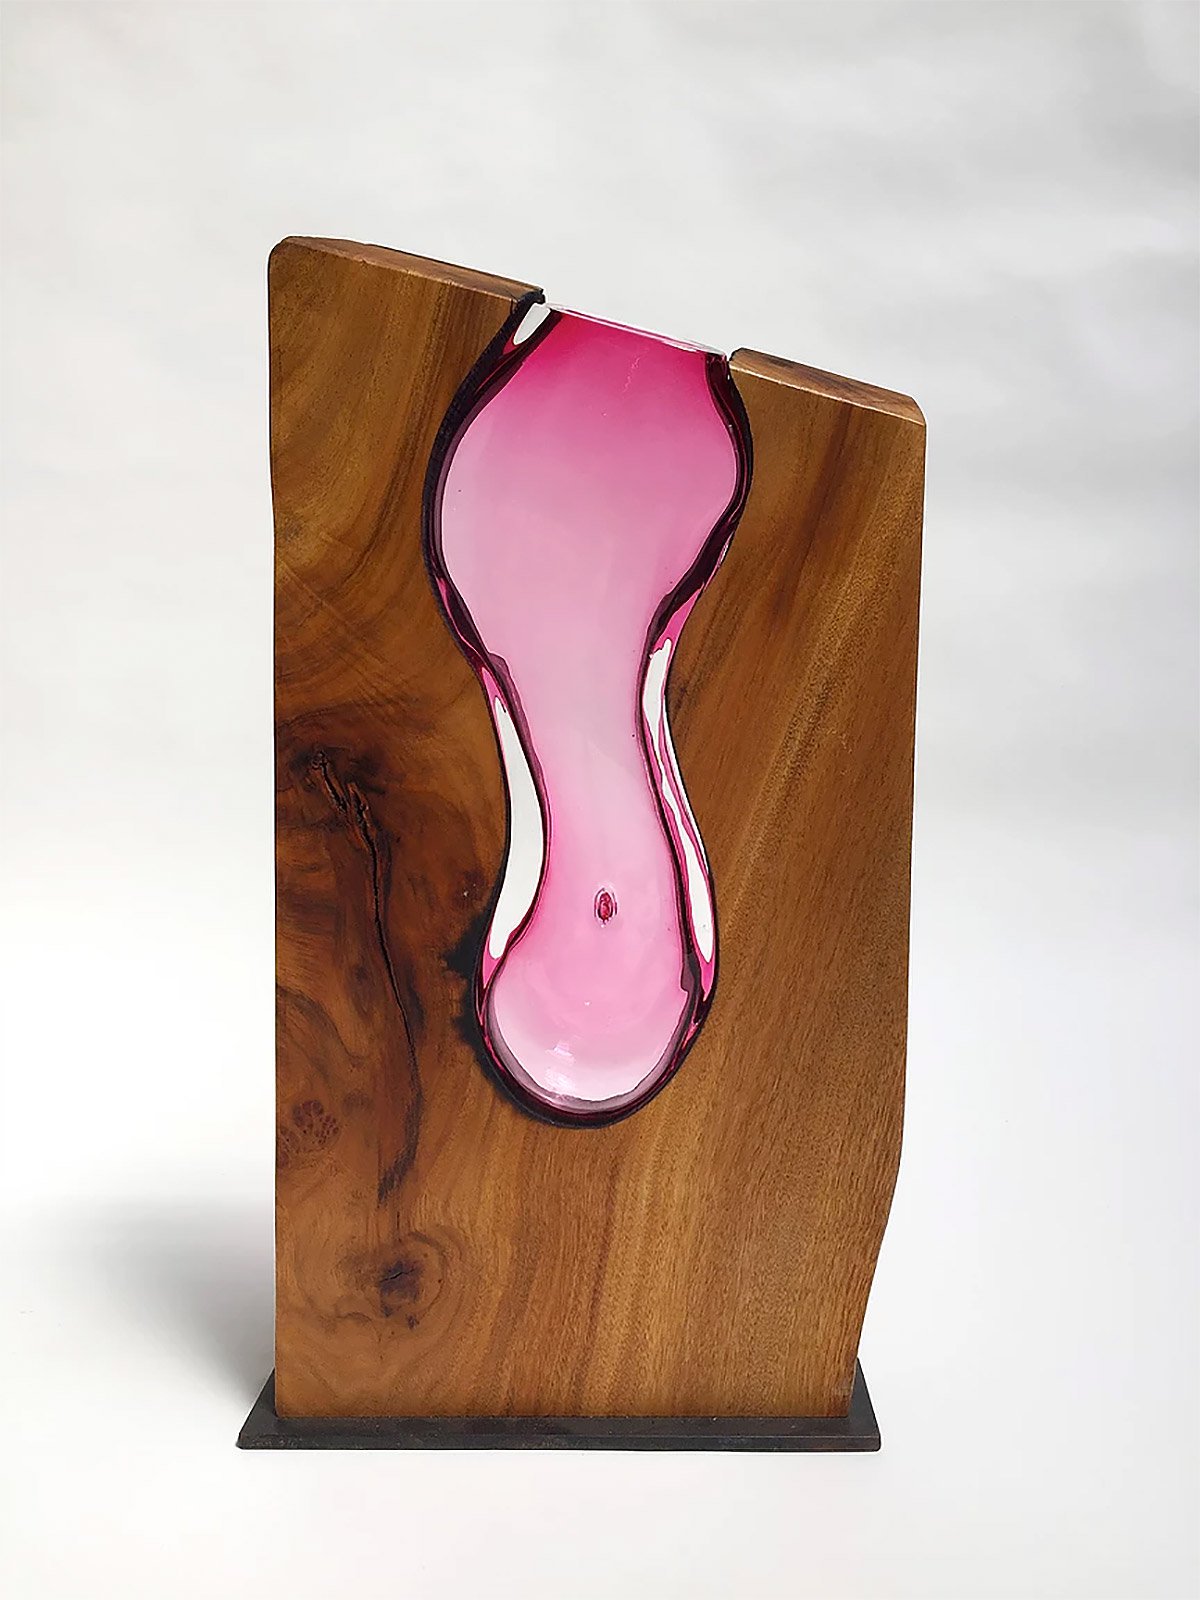 Surprising Sculptures Crafted from Glass and Wood – Fubiz Media